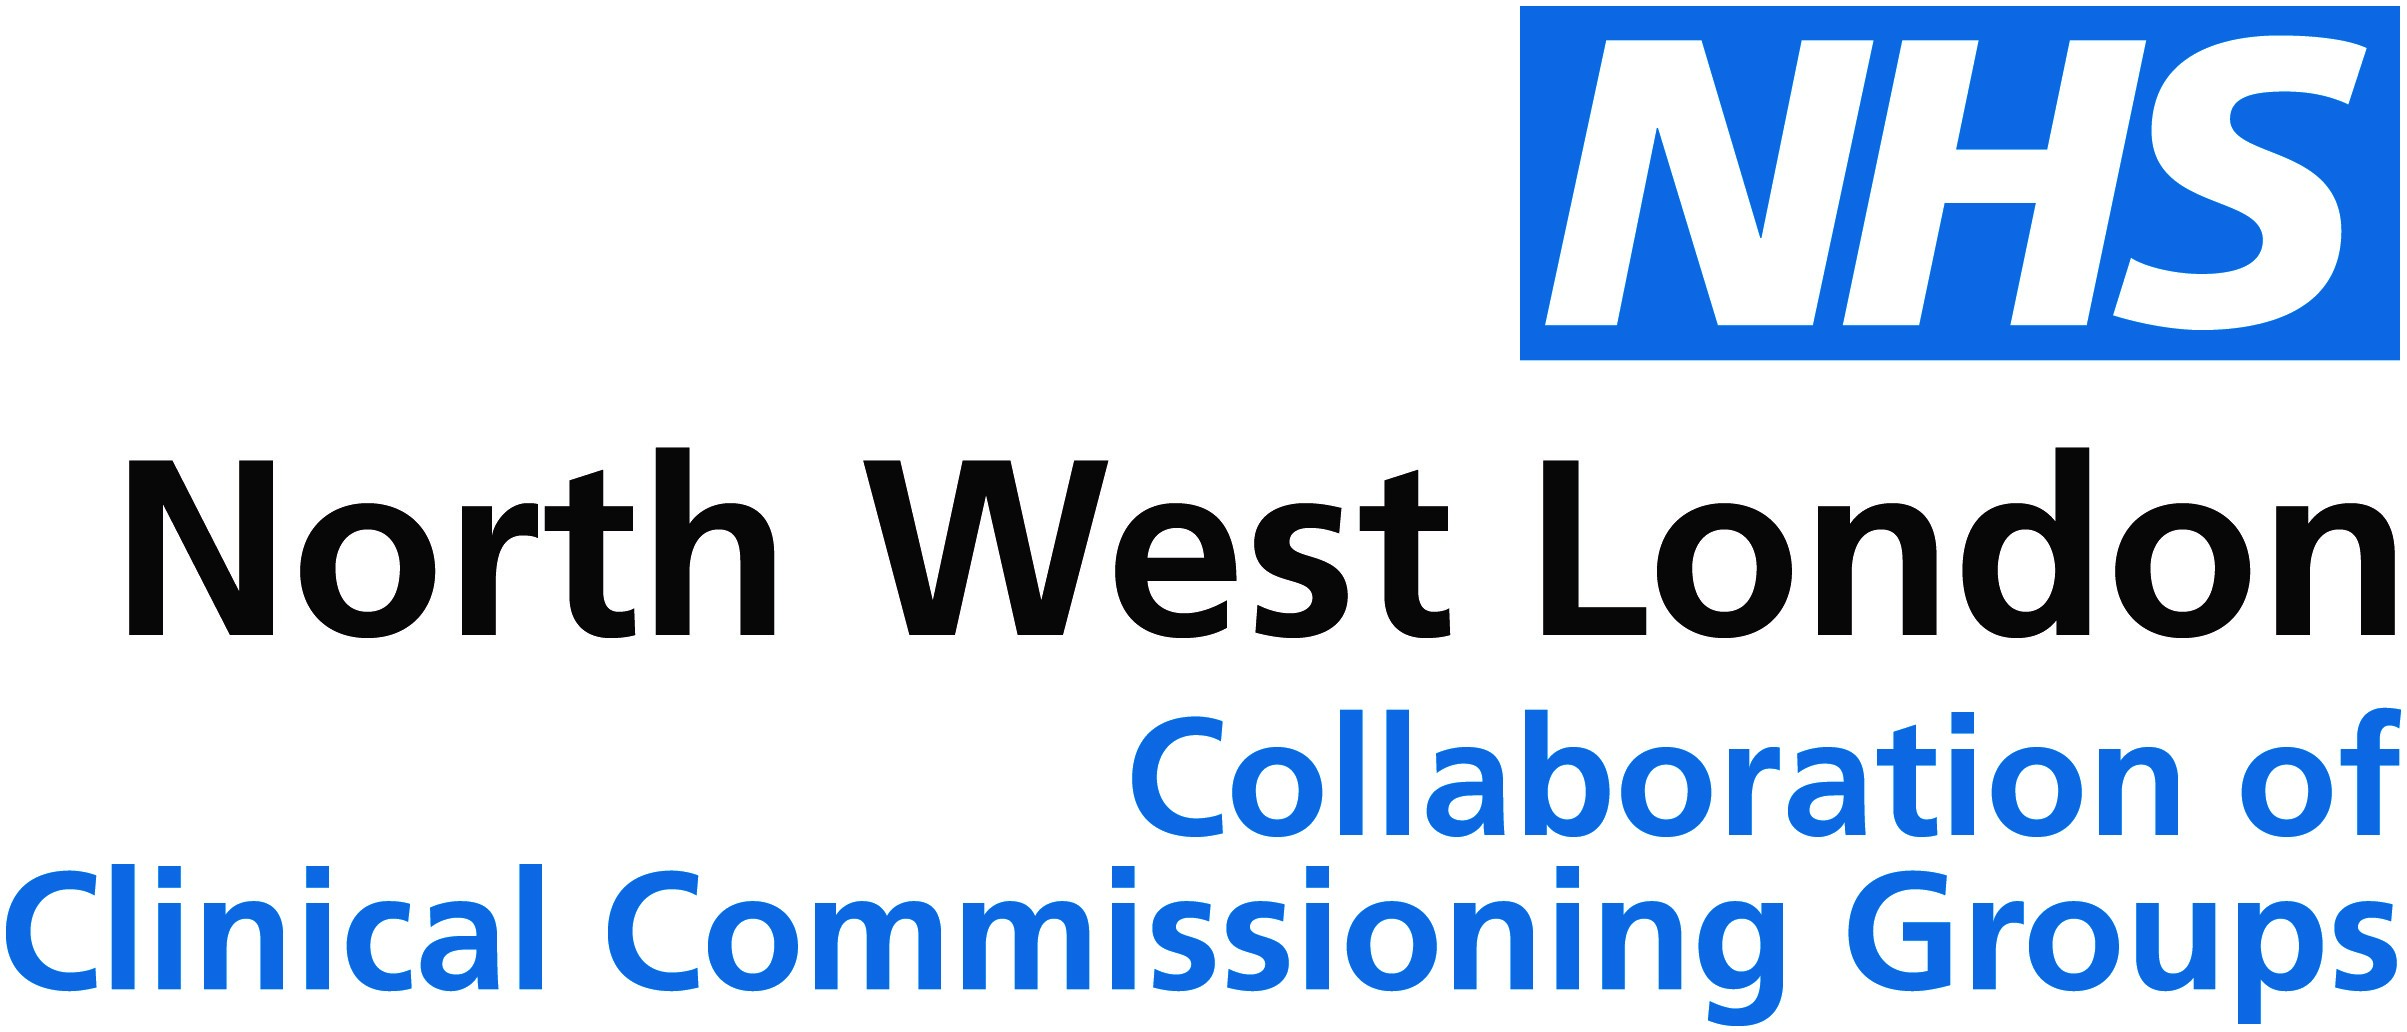 North West London CCG NHS